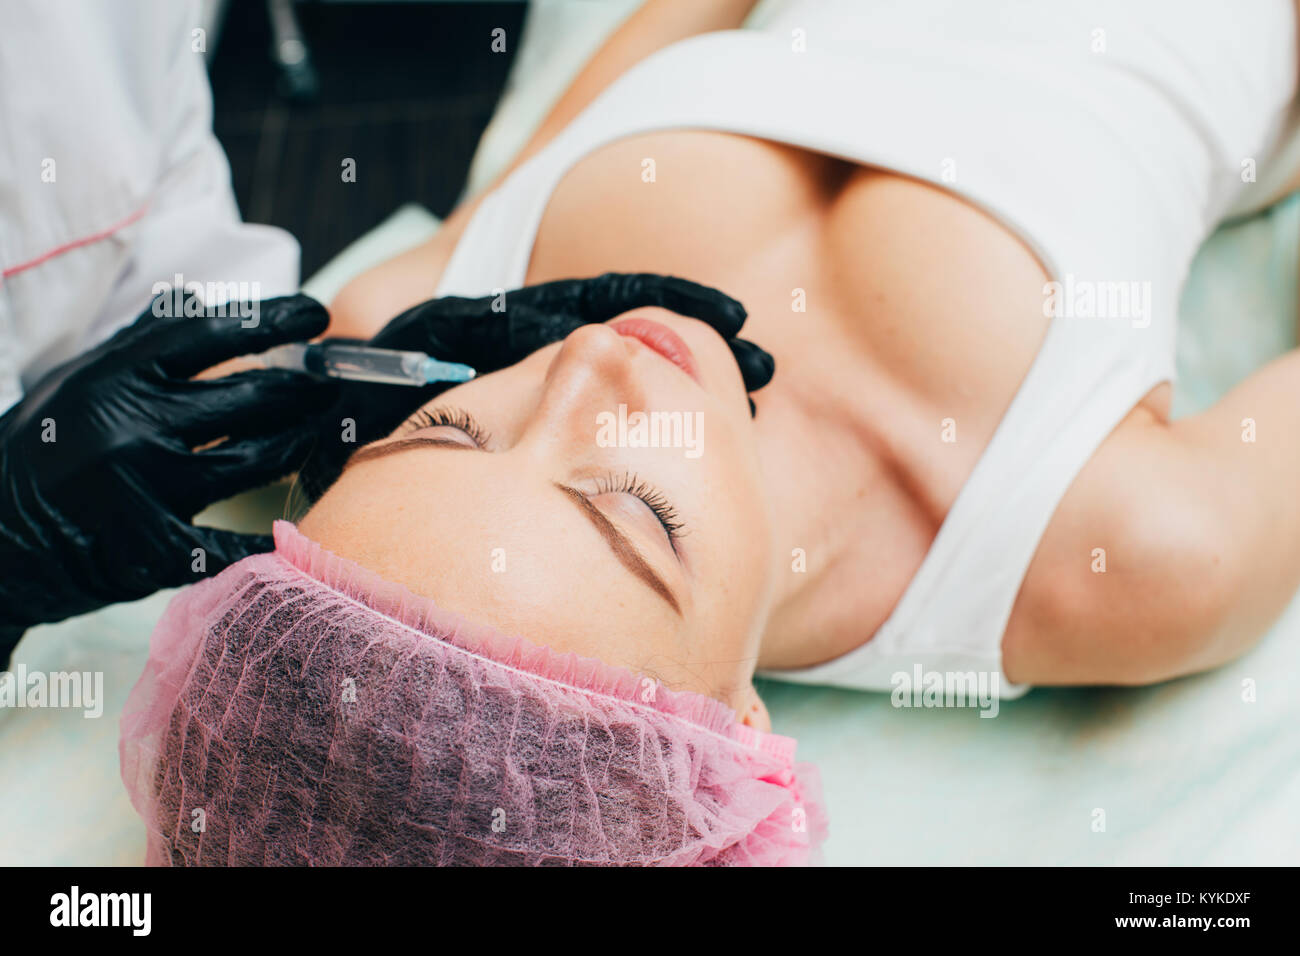 Cosmetic Treatment. Closeup Beautician Hands Doing Facial Skin Lifting Injection To Woman's Face. Female With Closed Eyes Receiving Beauty. Biorevital Stock Photo